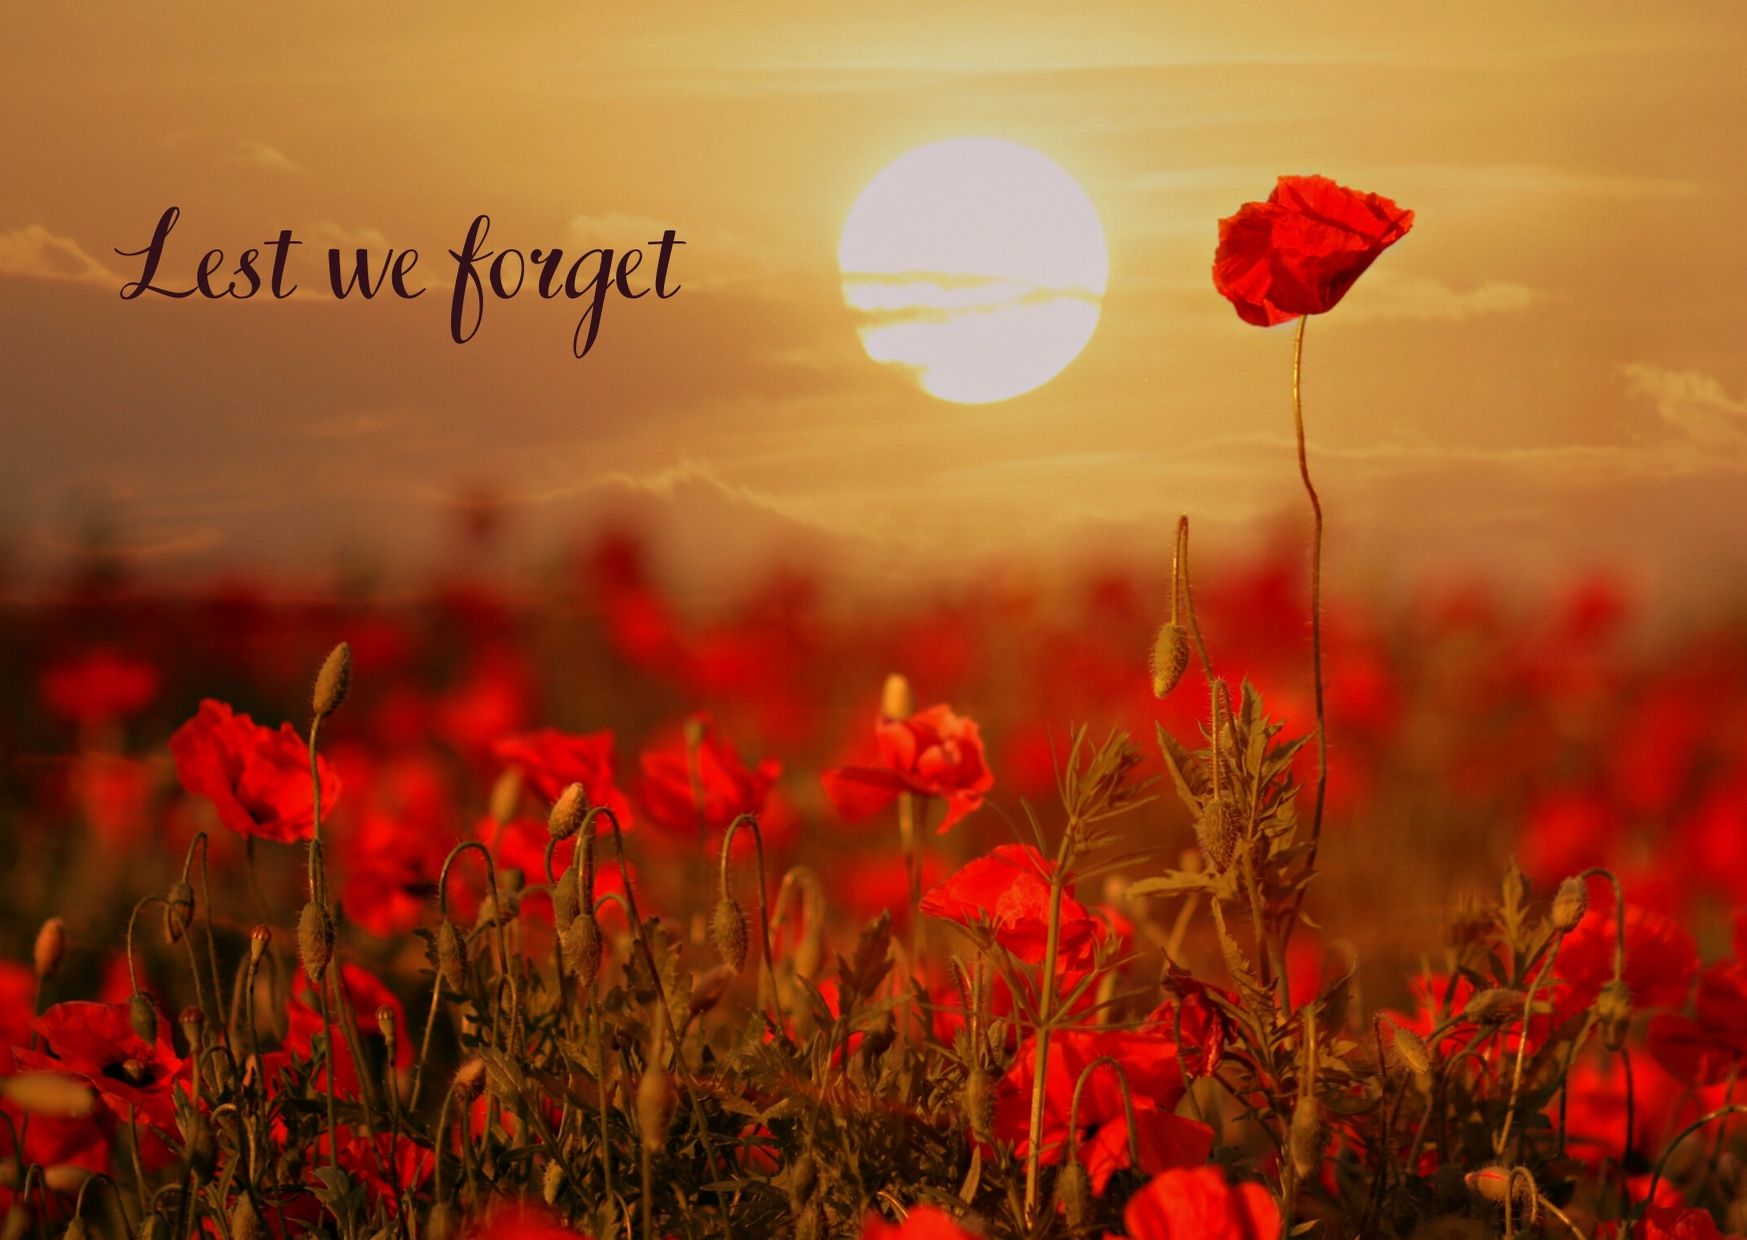 Anzac Day Anzac day (/ˈænzæk/) is a national day of remembrance in